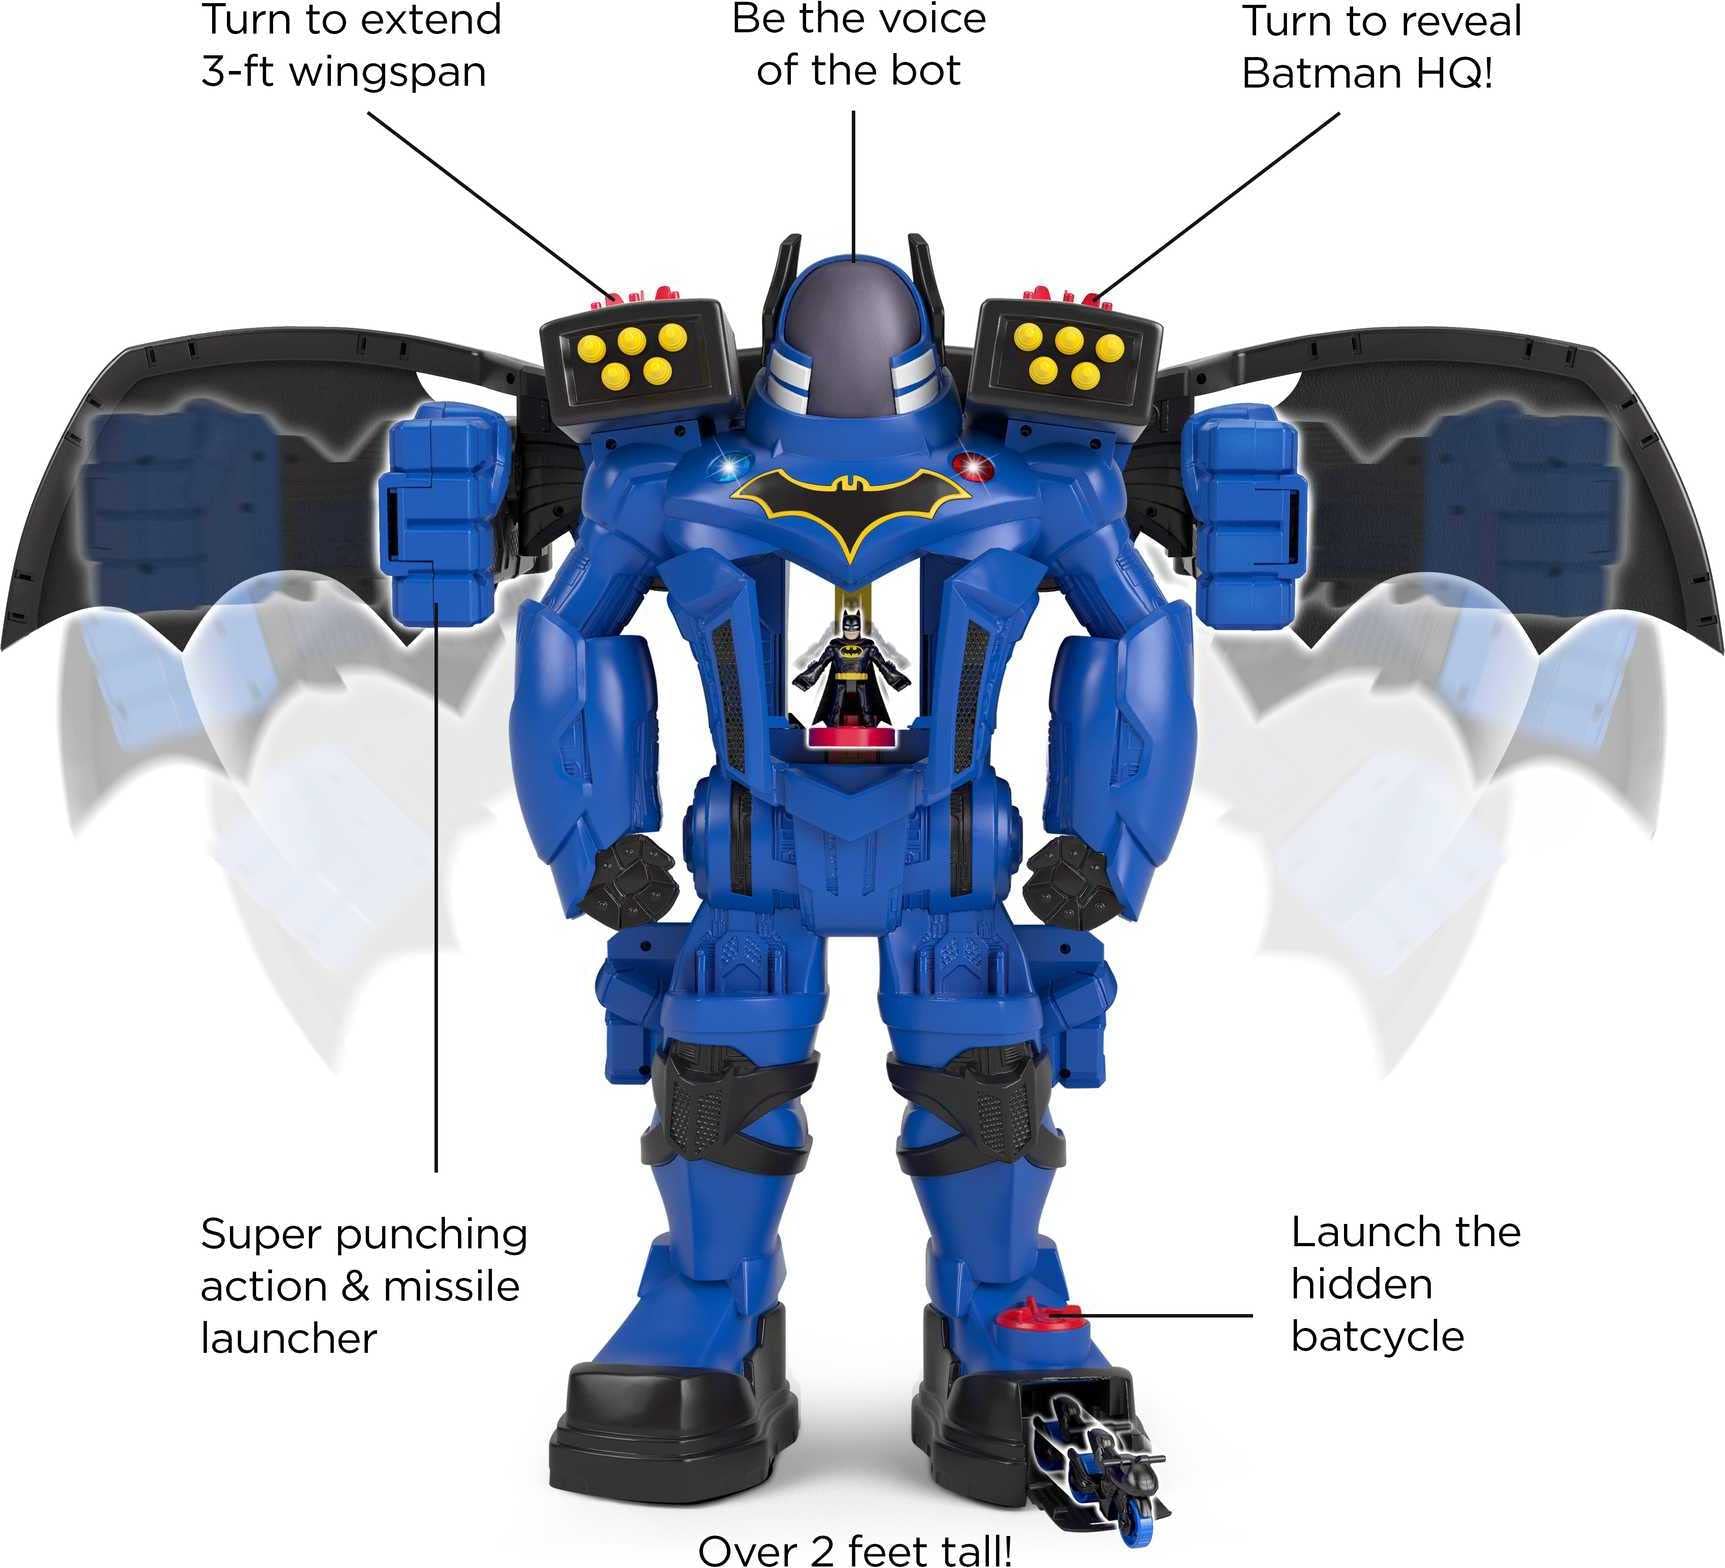 Imaginext DC Super Friends Batman Robot Playset, Batbot Xtreme, 30 Inches Tall with Figure & 11 Pieces for Preschool Kids Ages 3+ Years (Amazon Exclusive)